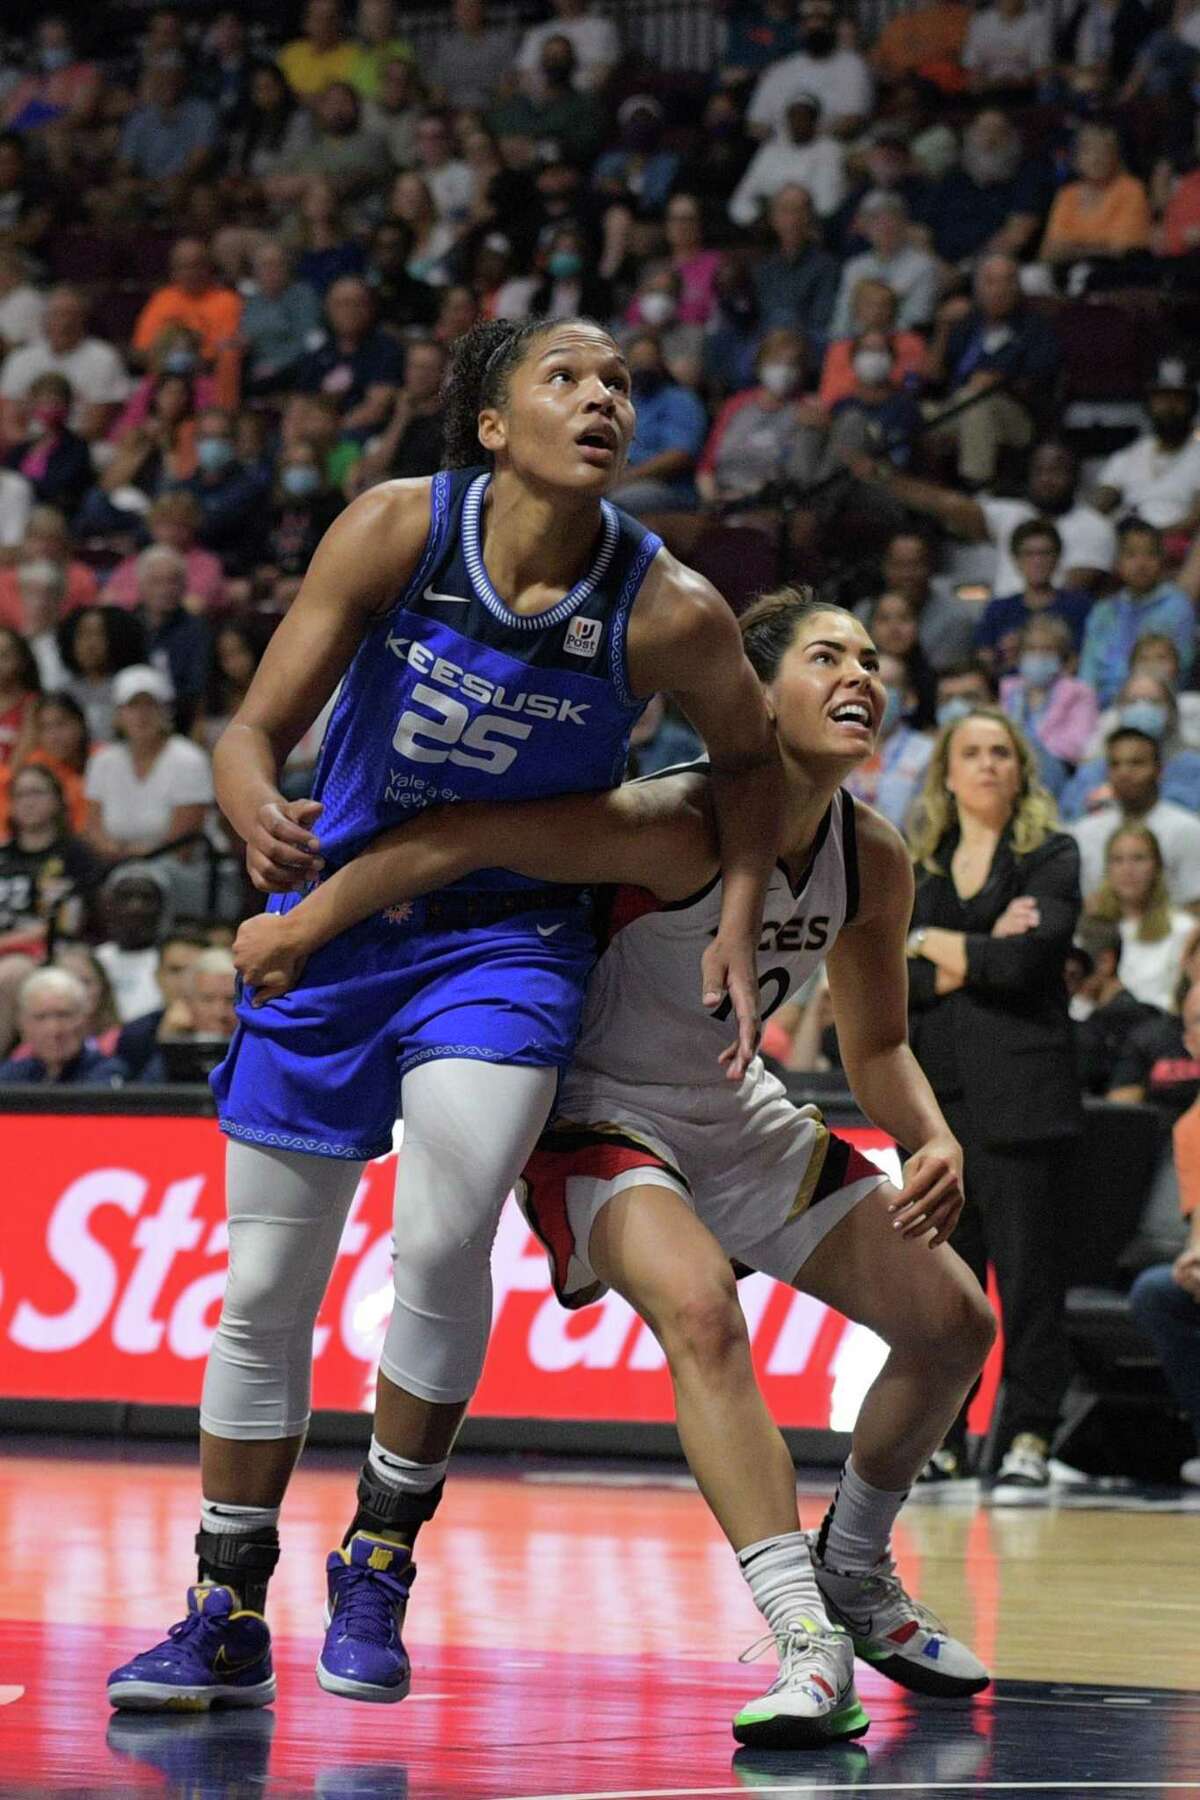 UNCASVILLE, CT - JULY 17: Las Vegas Aces guard Kelsey Plum (10) boxes out Connecticut Sun forward Alyssa Thomas (25) during the WNBA game between the Las Vegas Aces and the Connecticut Sun on July 17, 2022, at Mohegan Sun Arena in Uncasville, CT. (Photo by Erica Denhoff/Icon Sportswire via Getty Images)